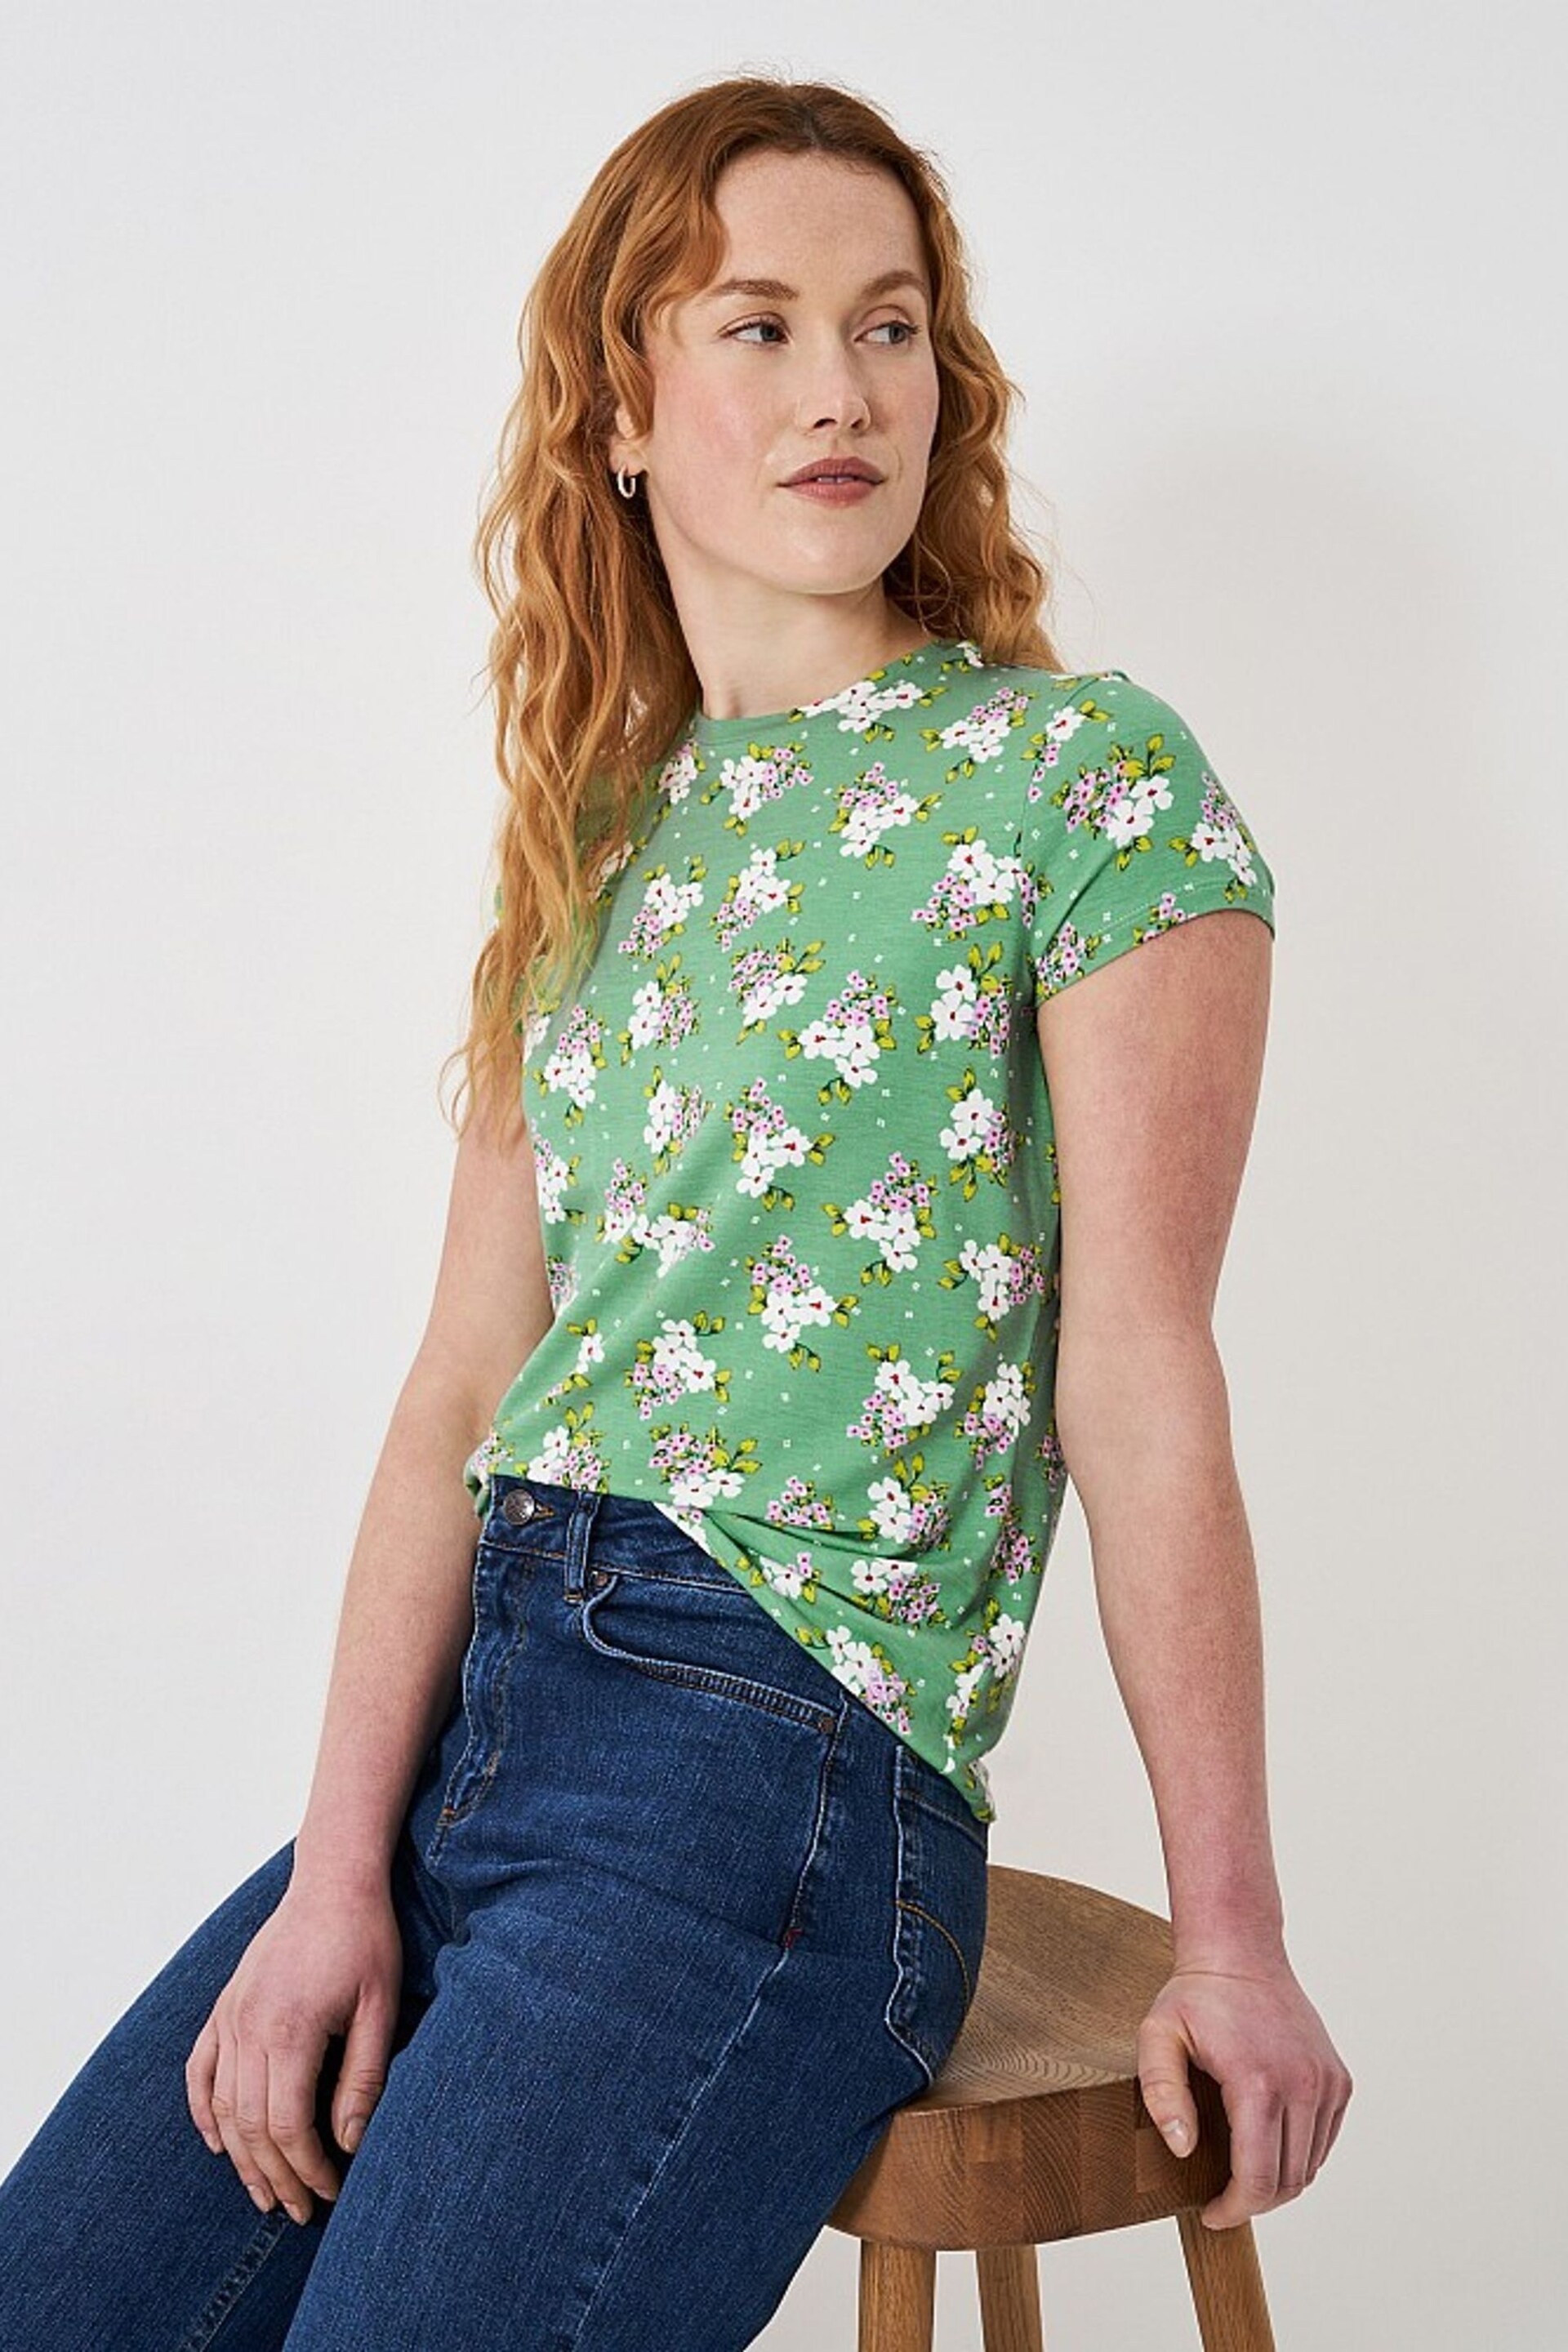 Crew Clothing Company Green Printed Jersey Top - Image 1 of 4